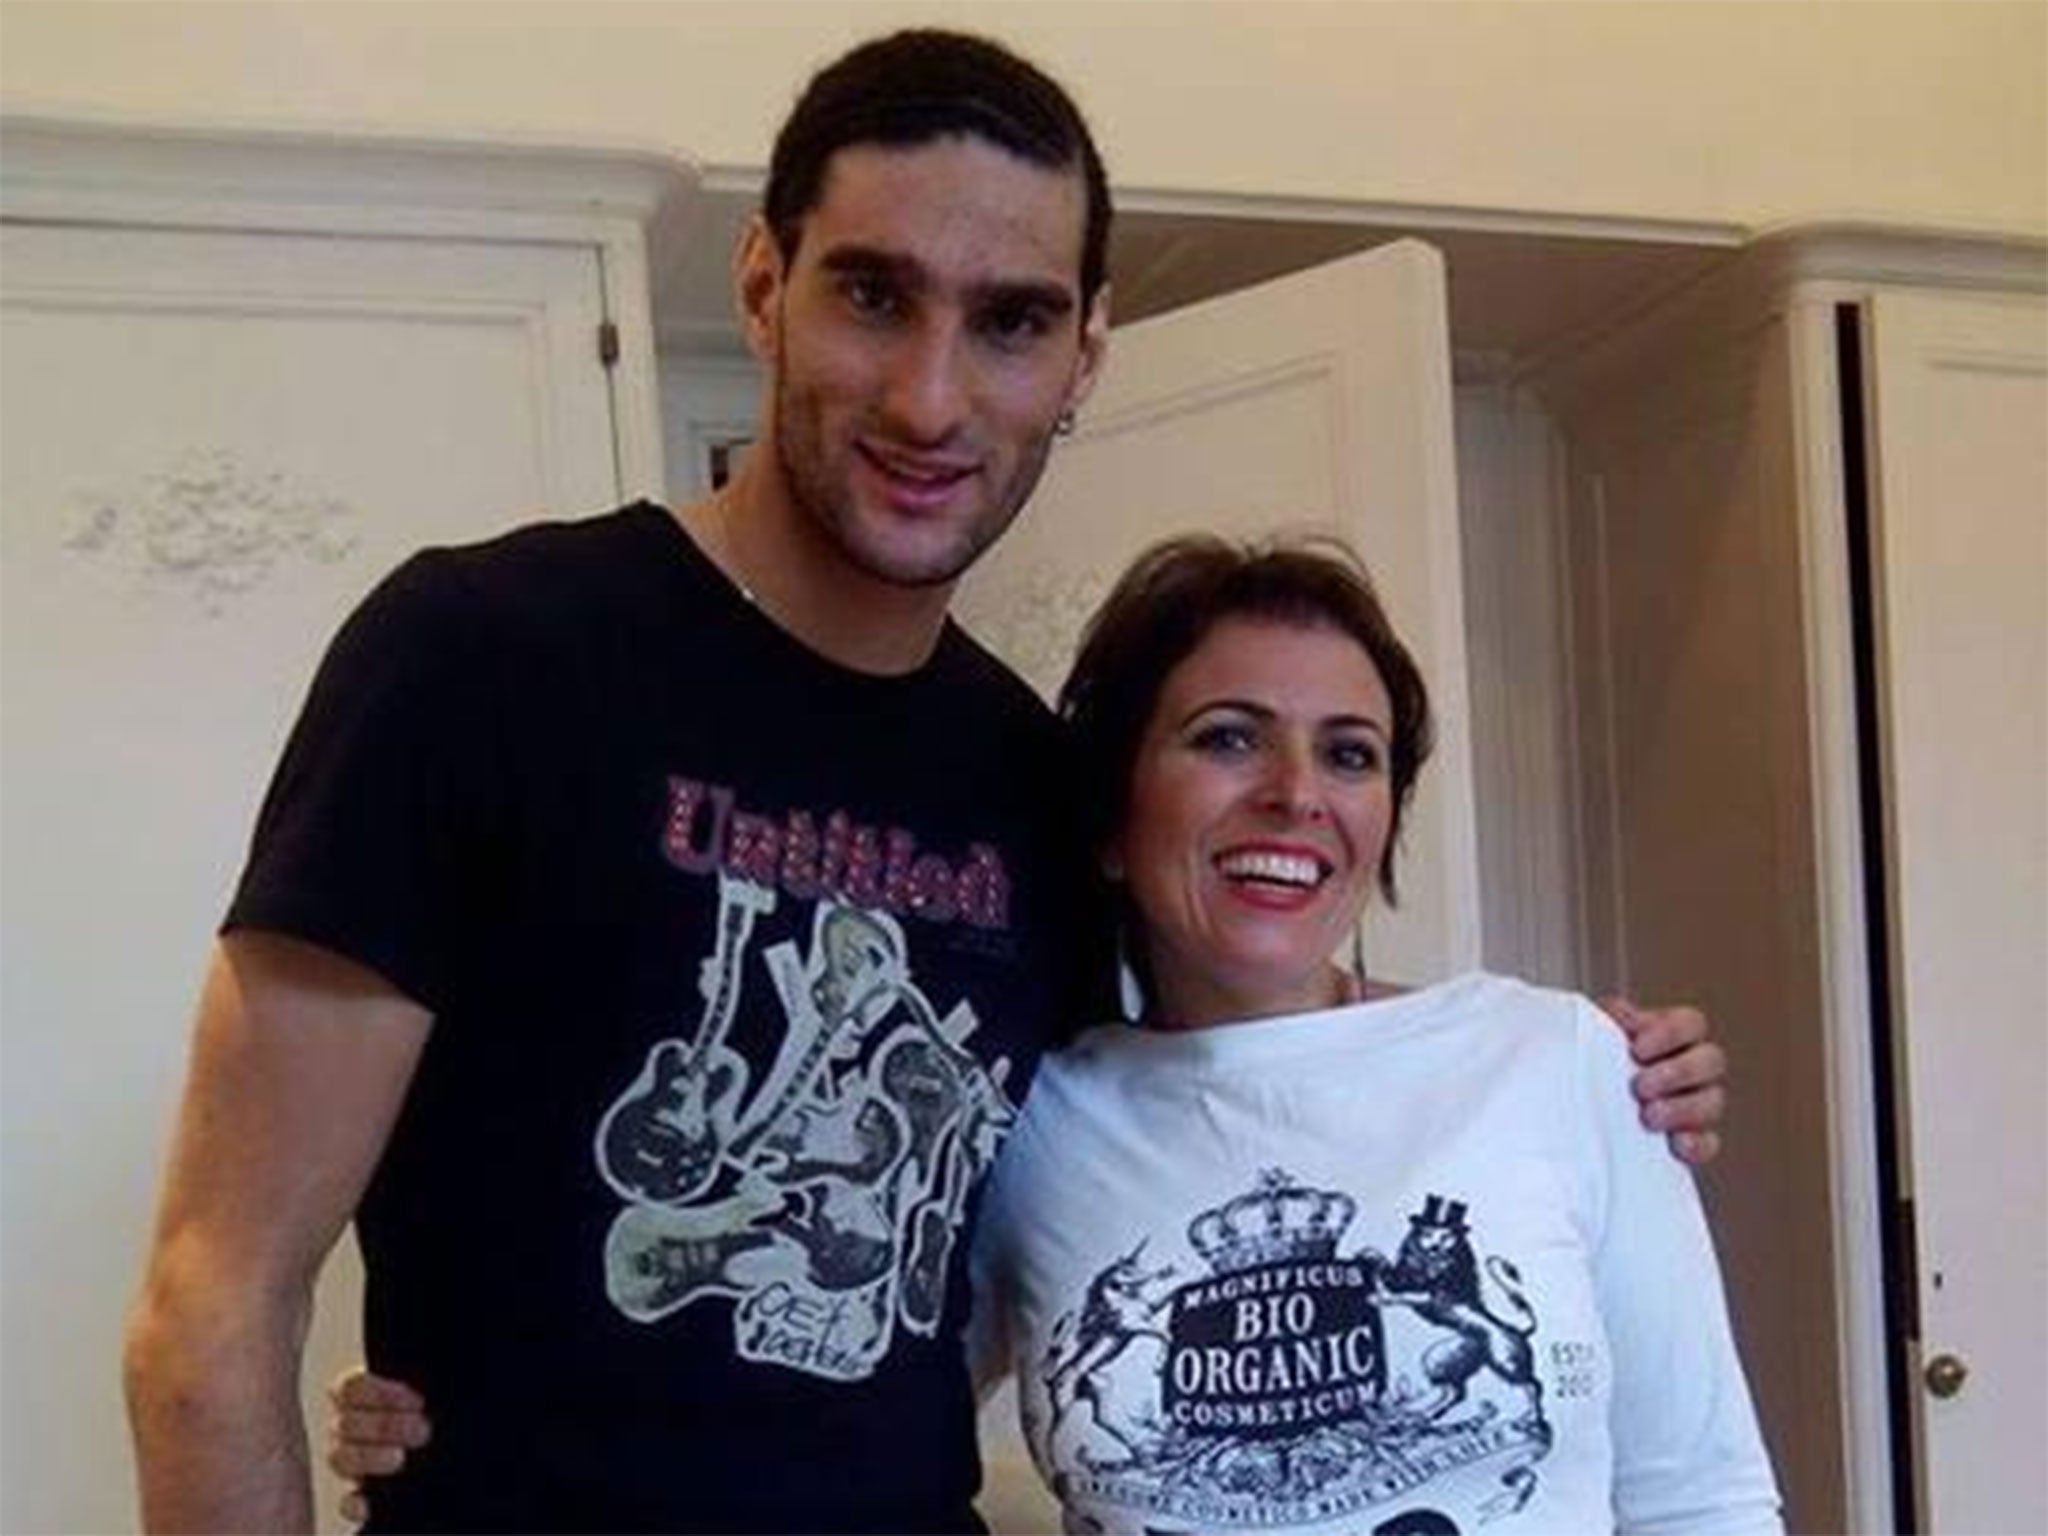 Manchester United Marouane Fellaini has allegedly cut off his hair